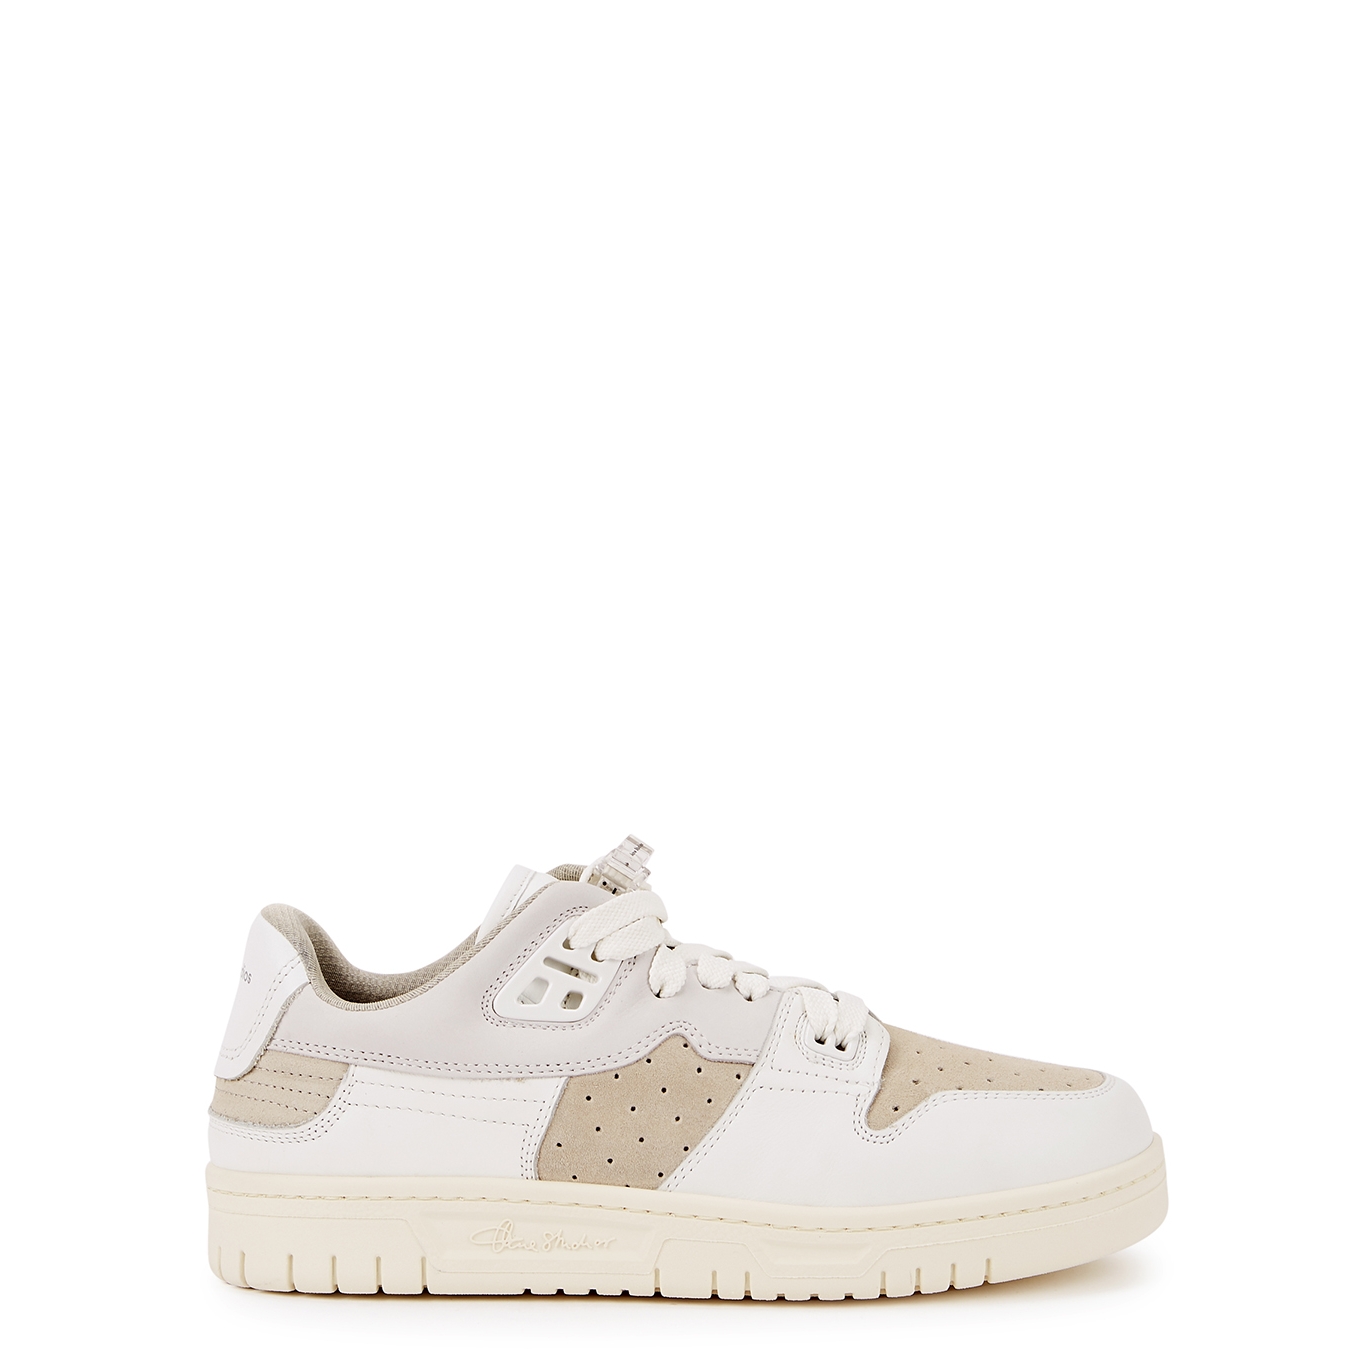 Acne Studios White Panelled Leather Sneakers - 3